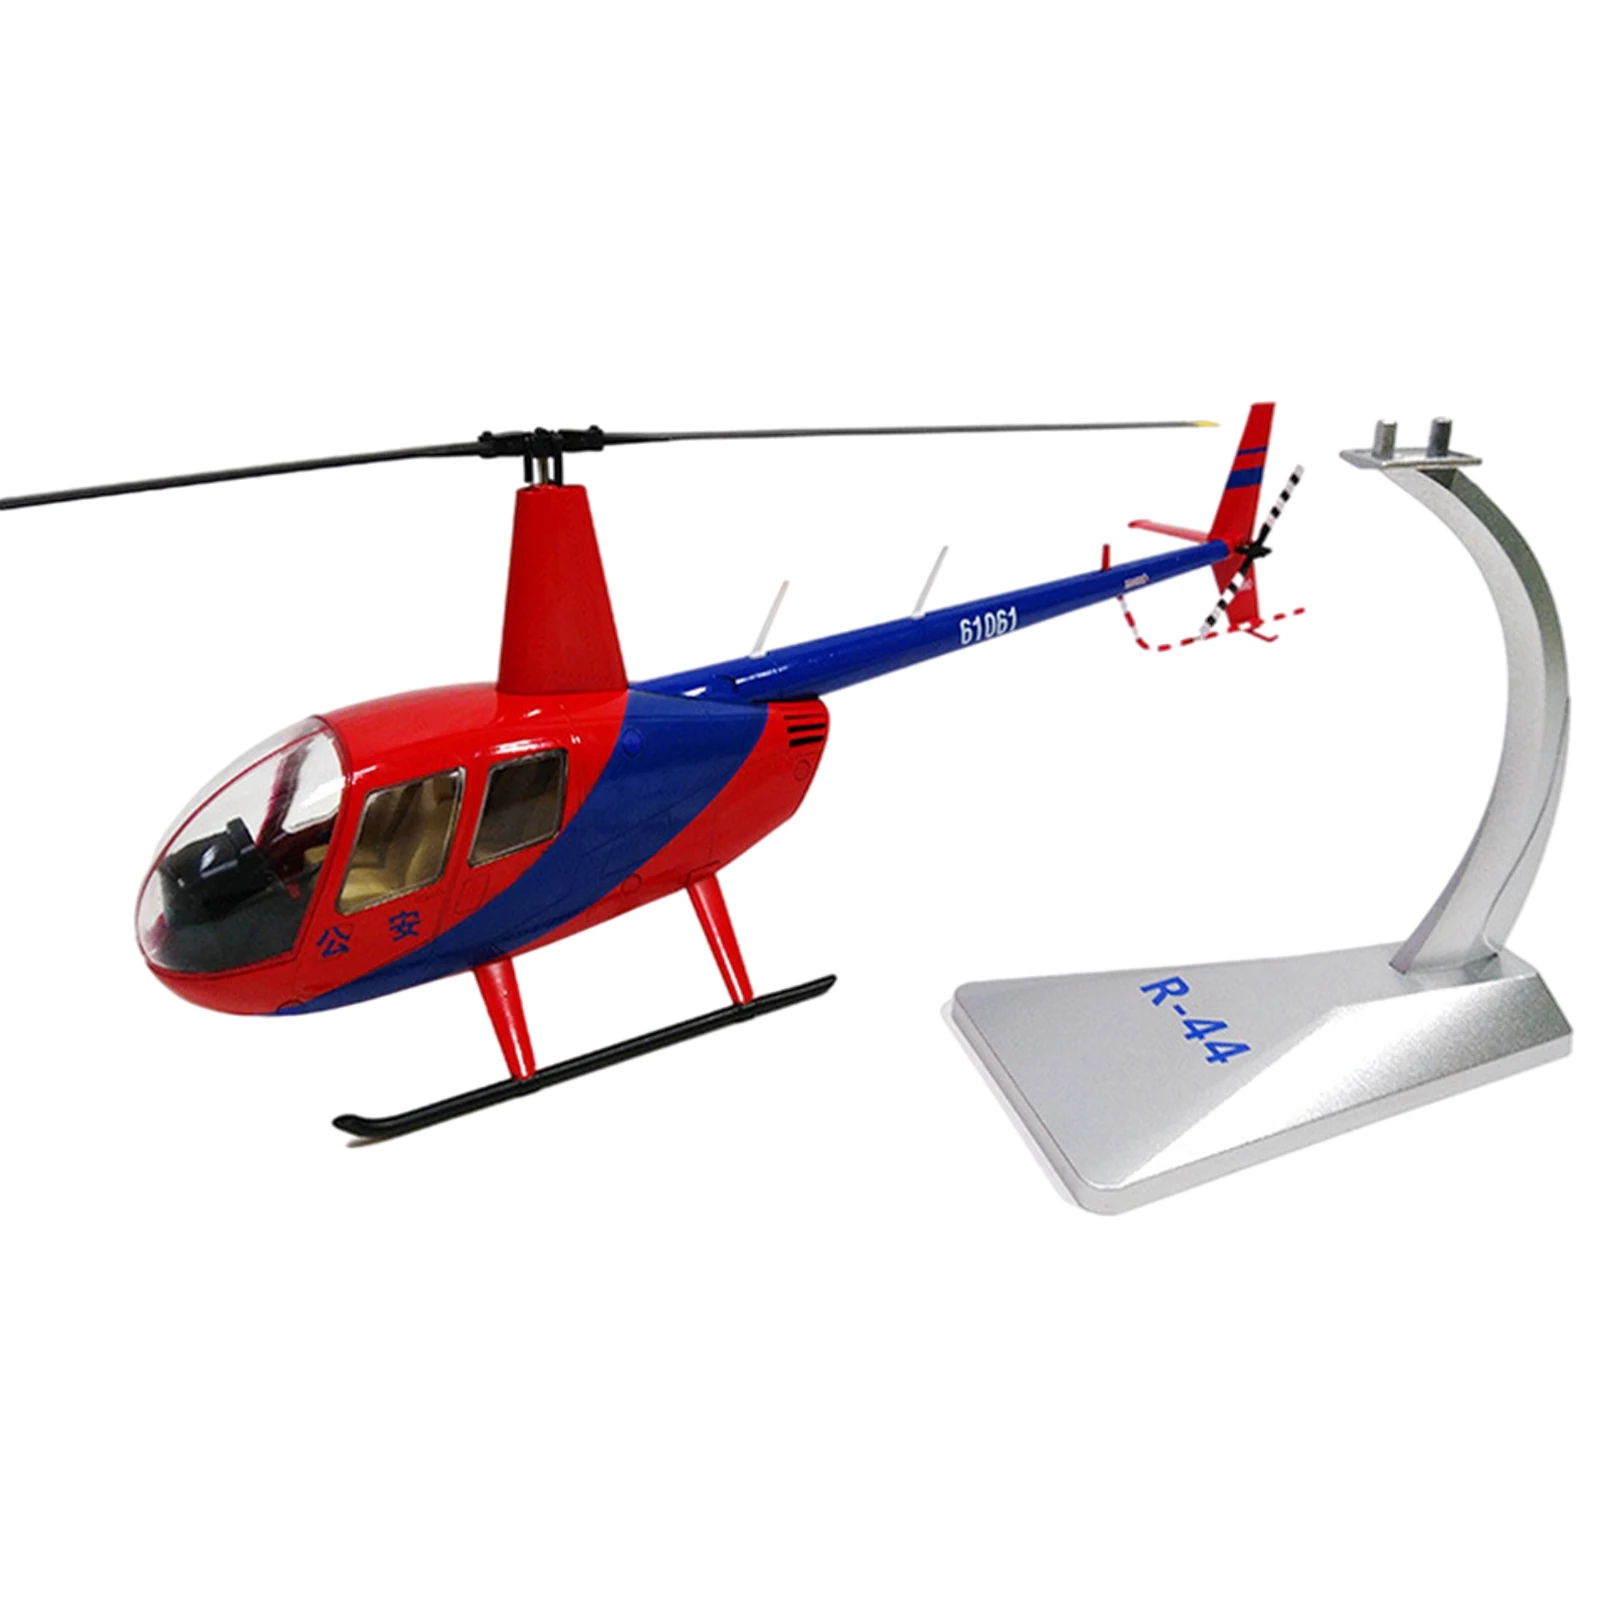 1:32 Scale ROBINSON R44 Air Force Helicopter Diecast Model Aircraft Collectables Gifts Home Ornaments